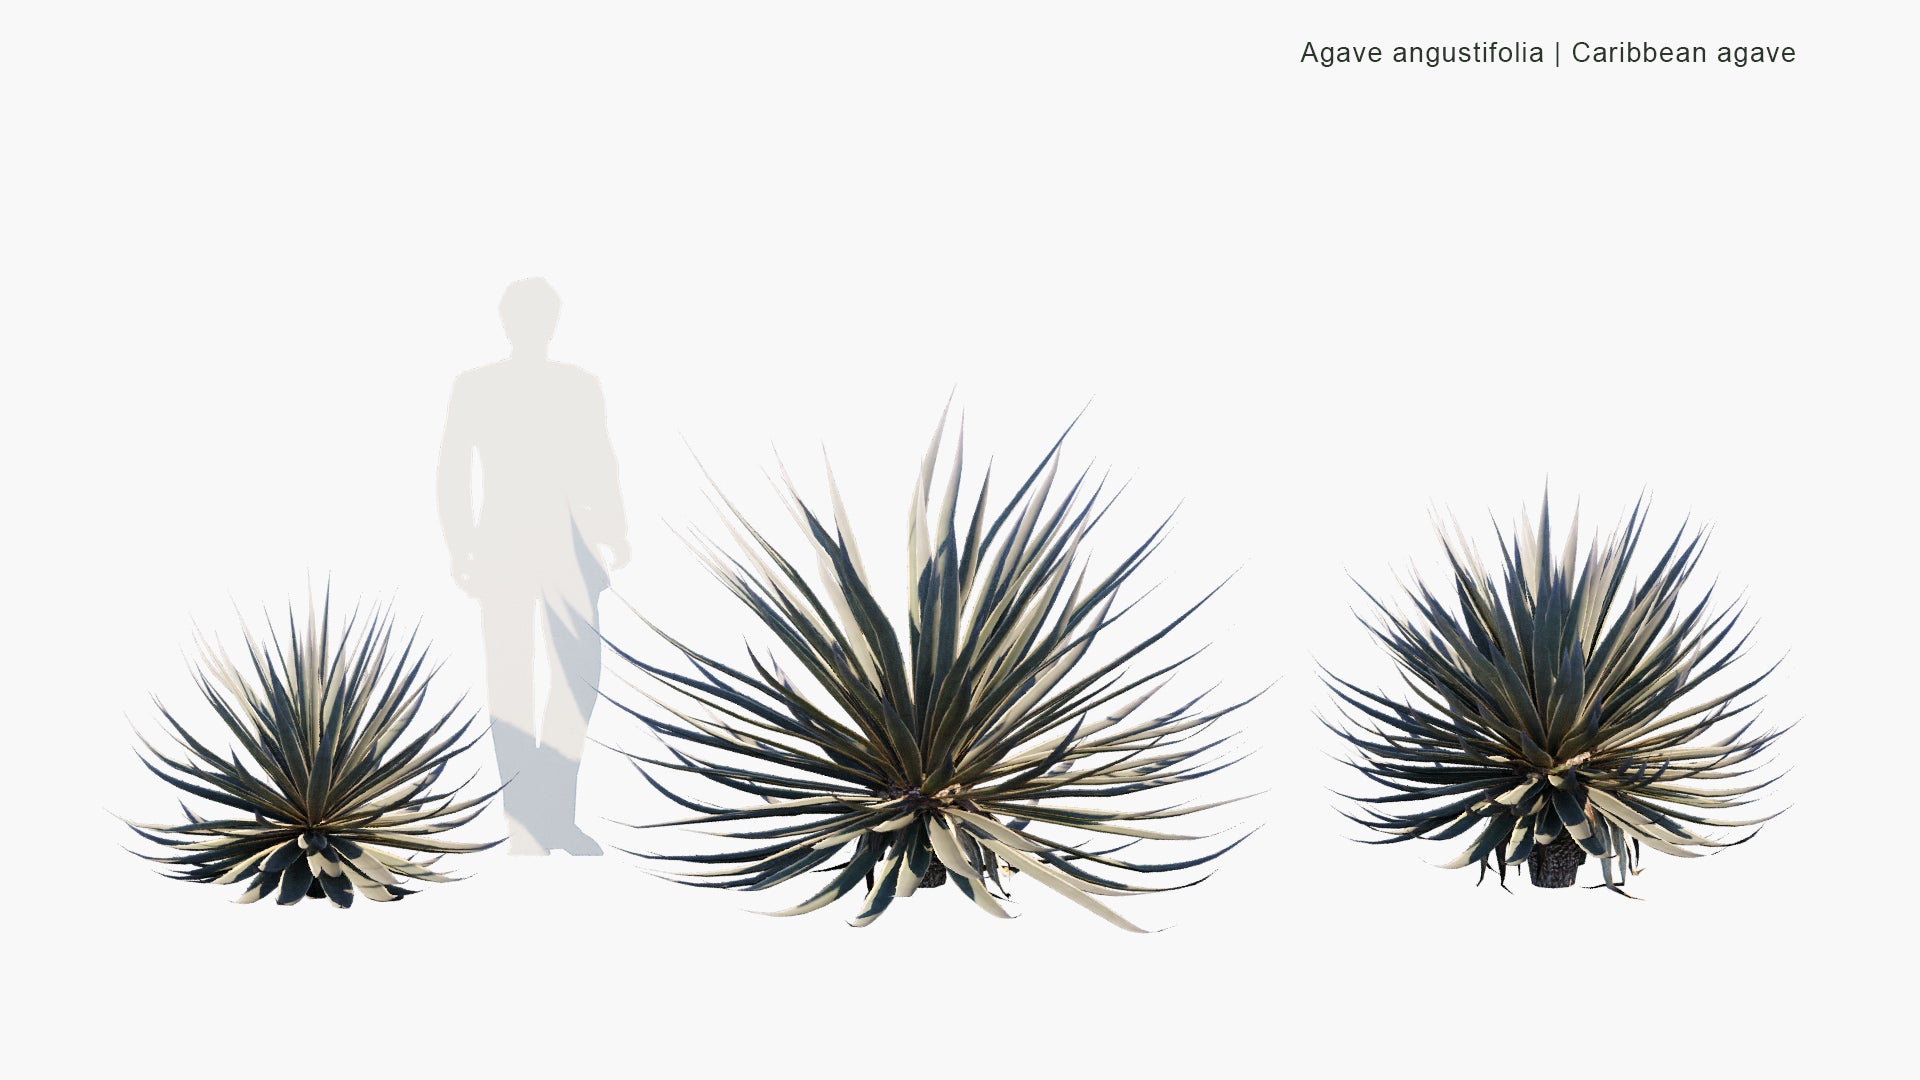 Low Poly Agave Angustifolia - Caribbean Agave (3D Model)